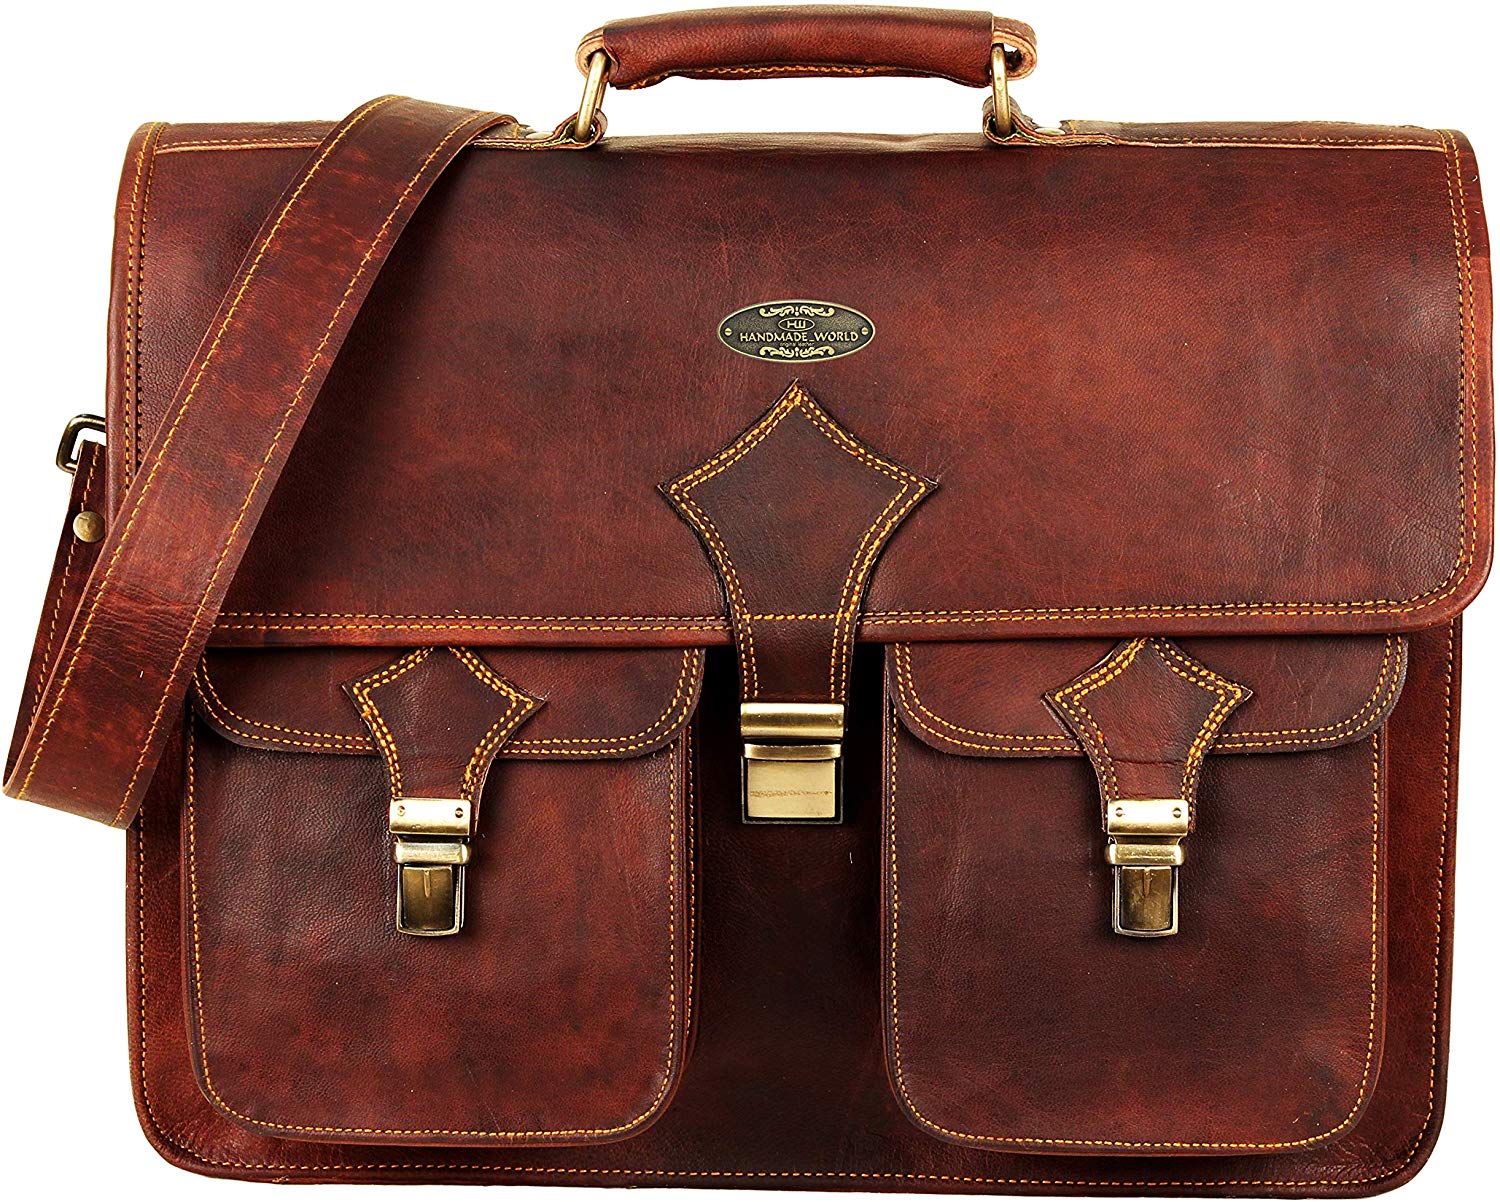 Full Grain Briefcase Bag with Top Handle and Push Clip